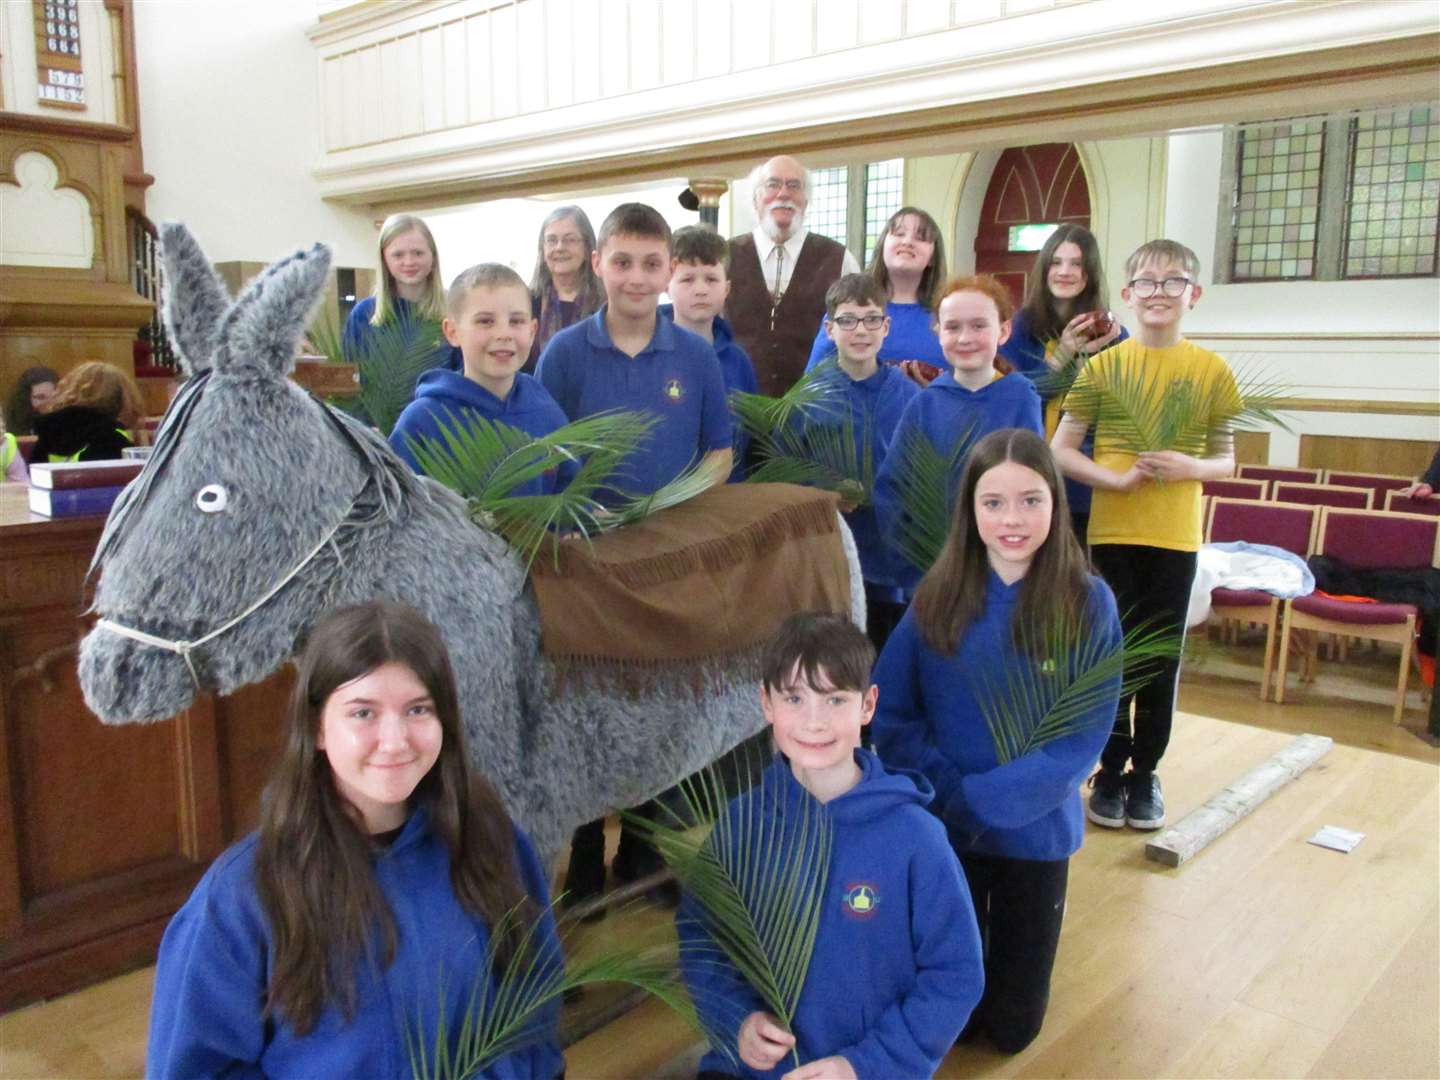 The donkey prop was a big hit with the pupils, seen here with (back) Wendy and Peter Hylton.